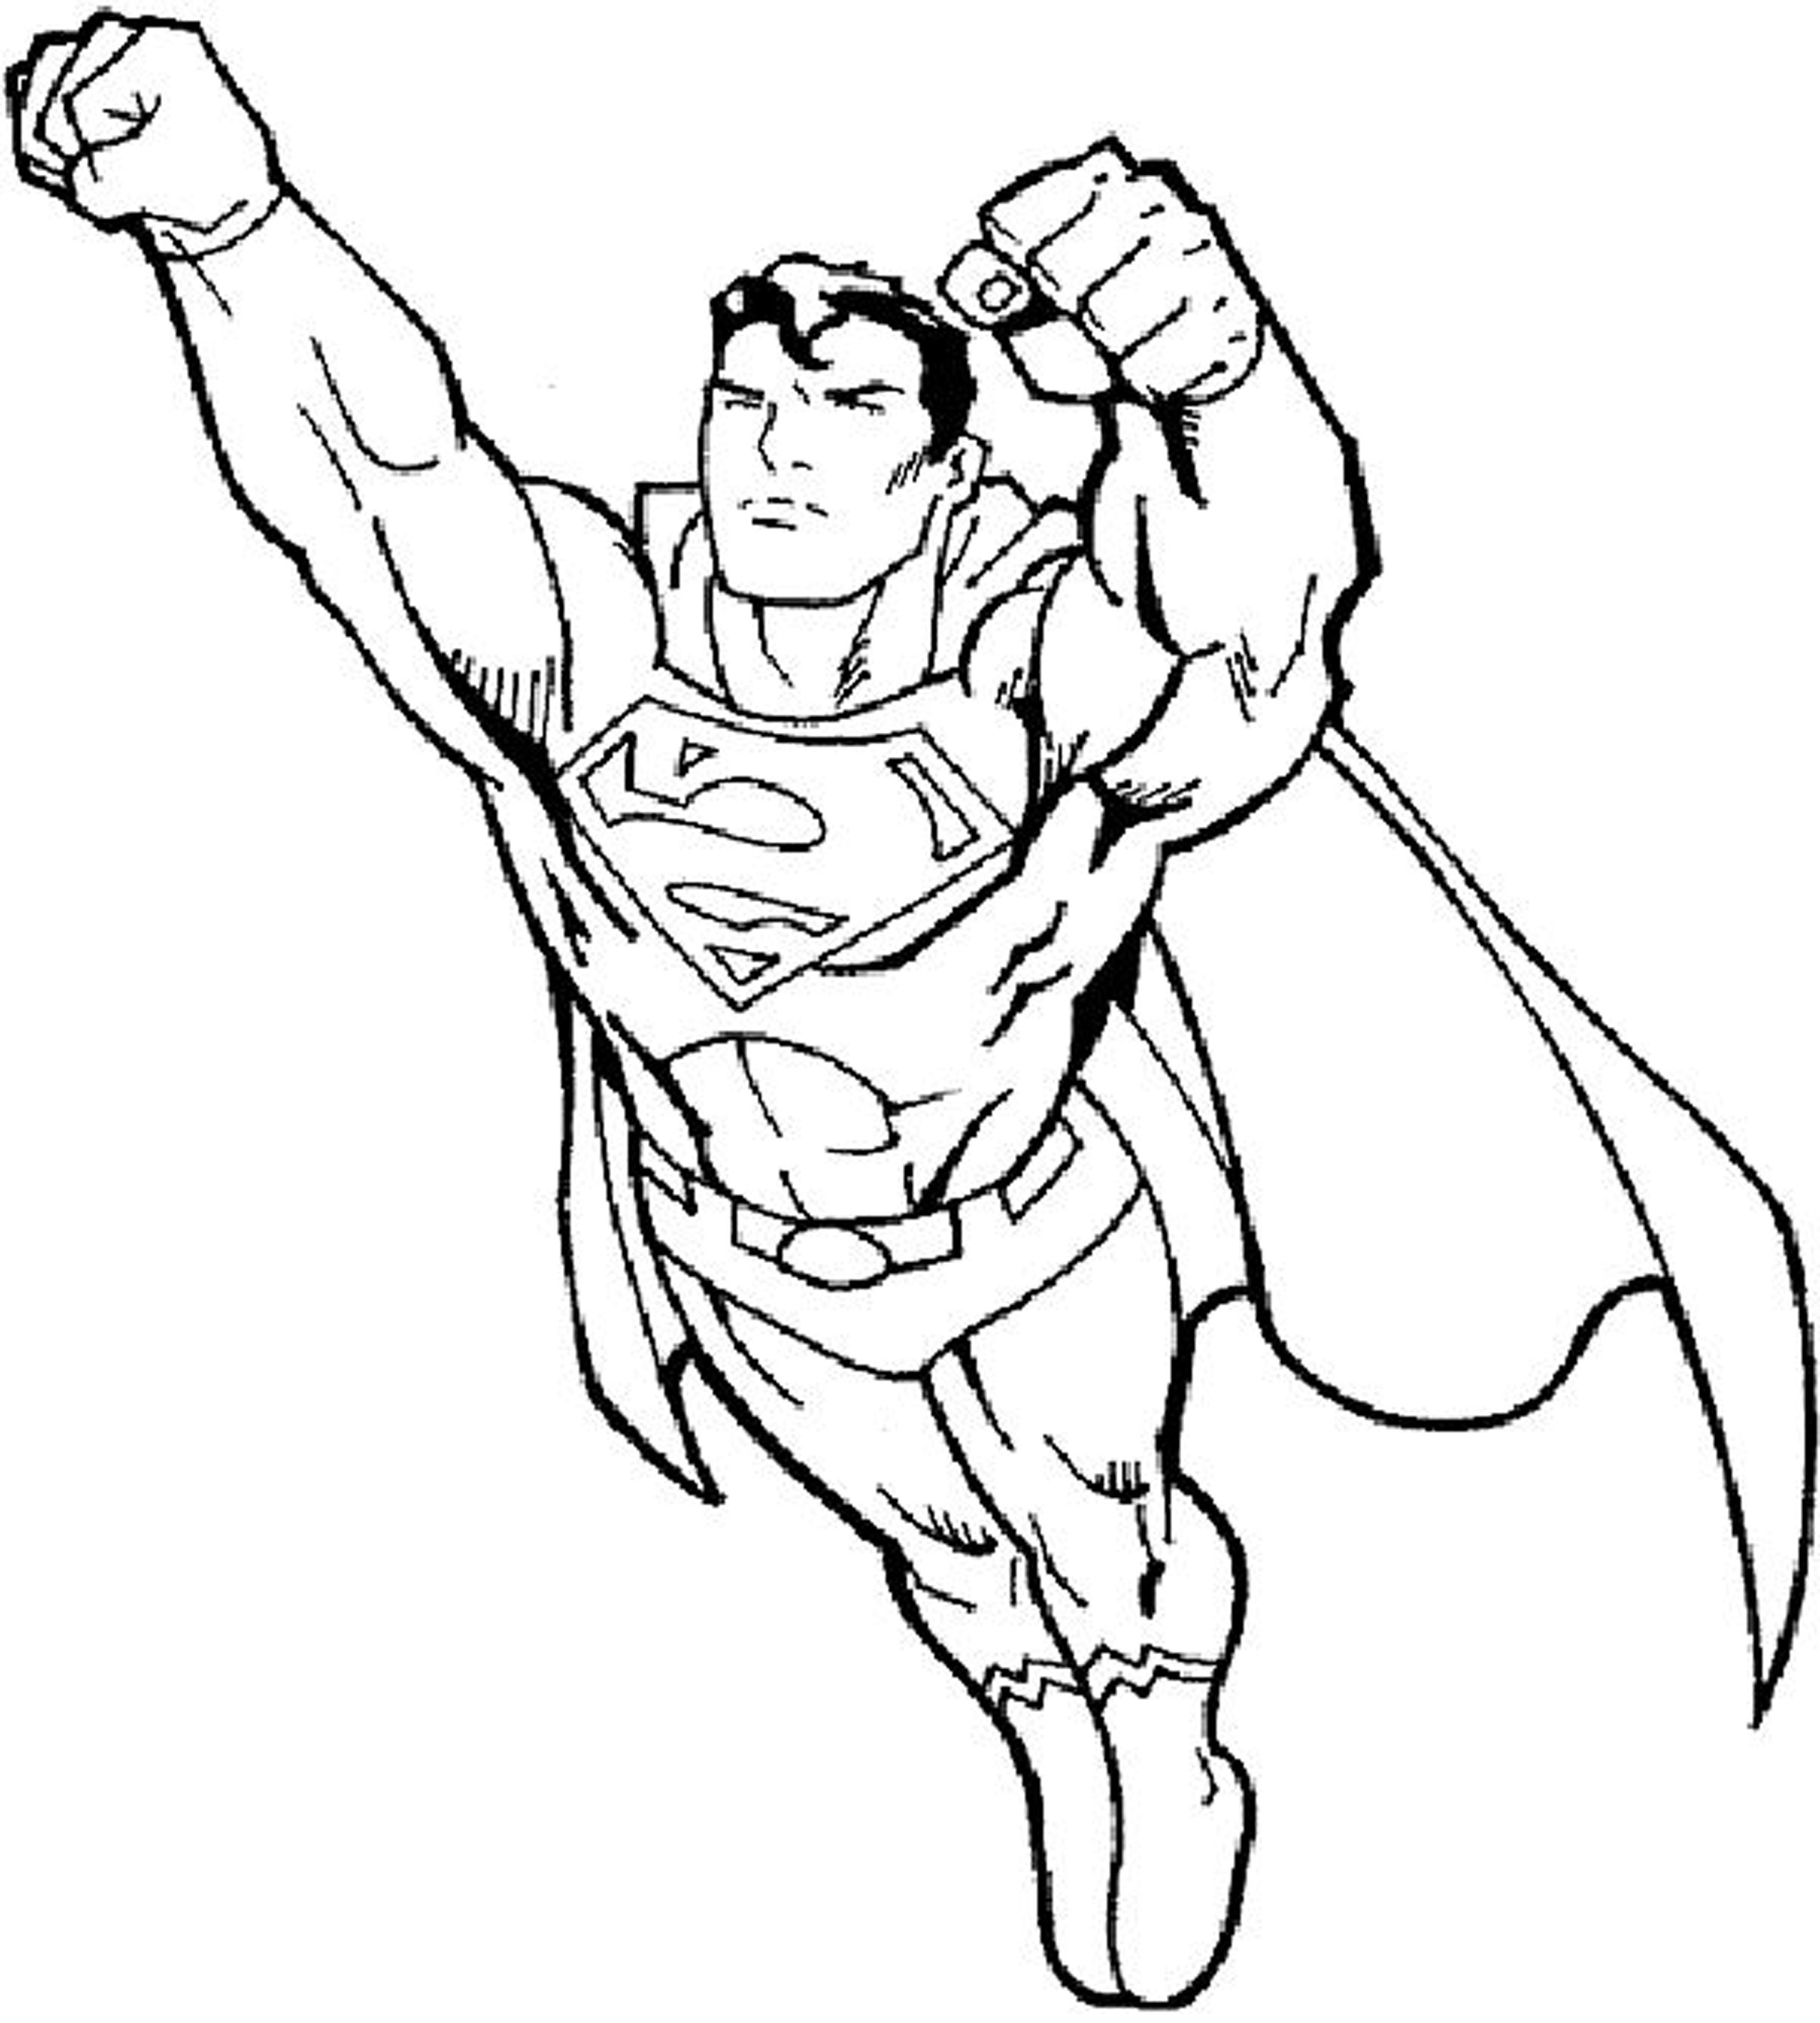 Printable Coloring Pages For Boys Pdf
 Coloring Pages Free Printable Coloring Pages For Boys